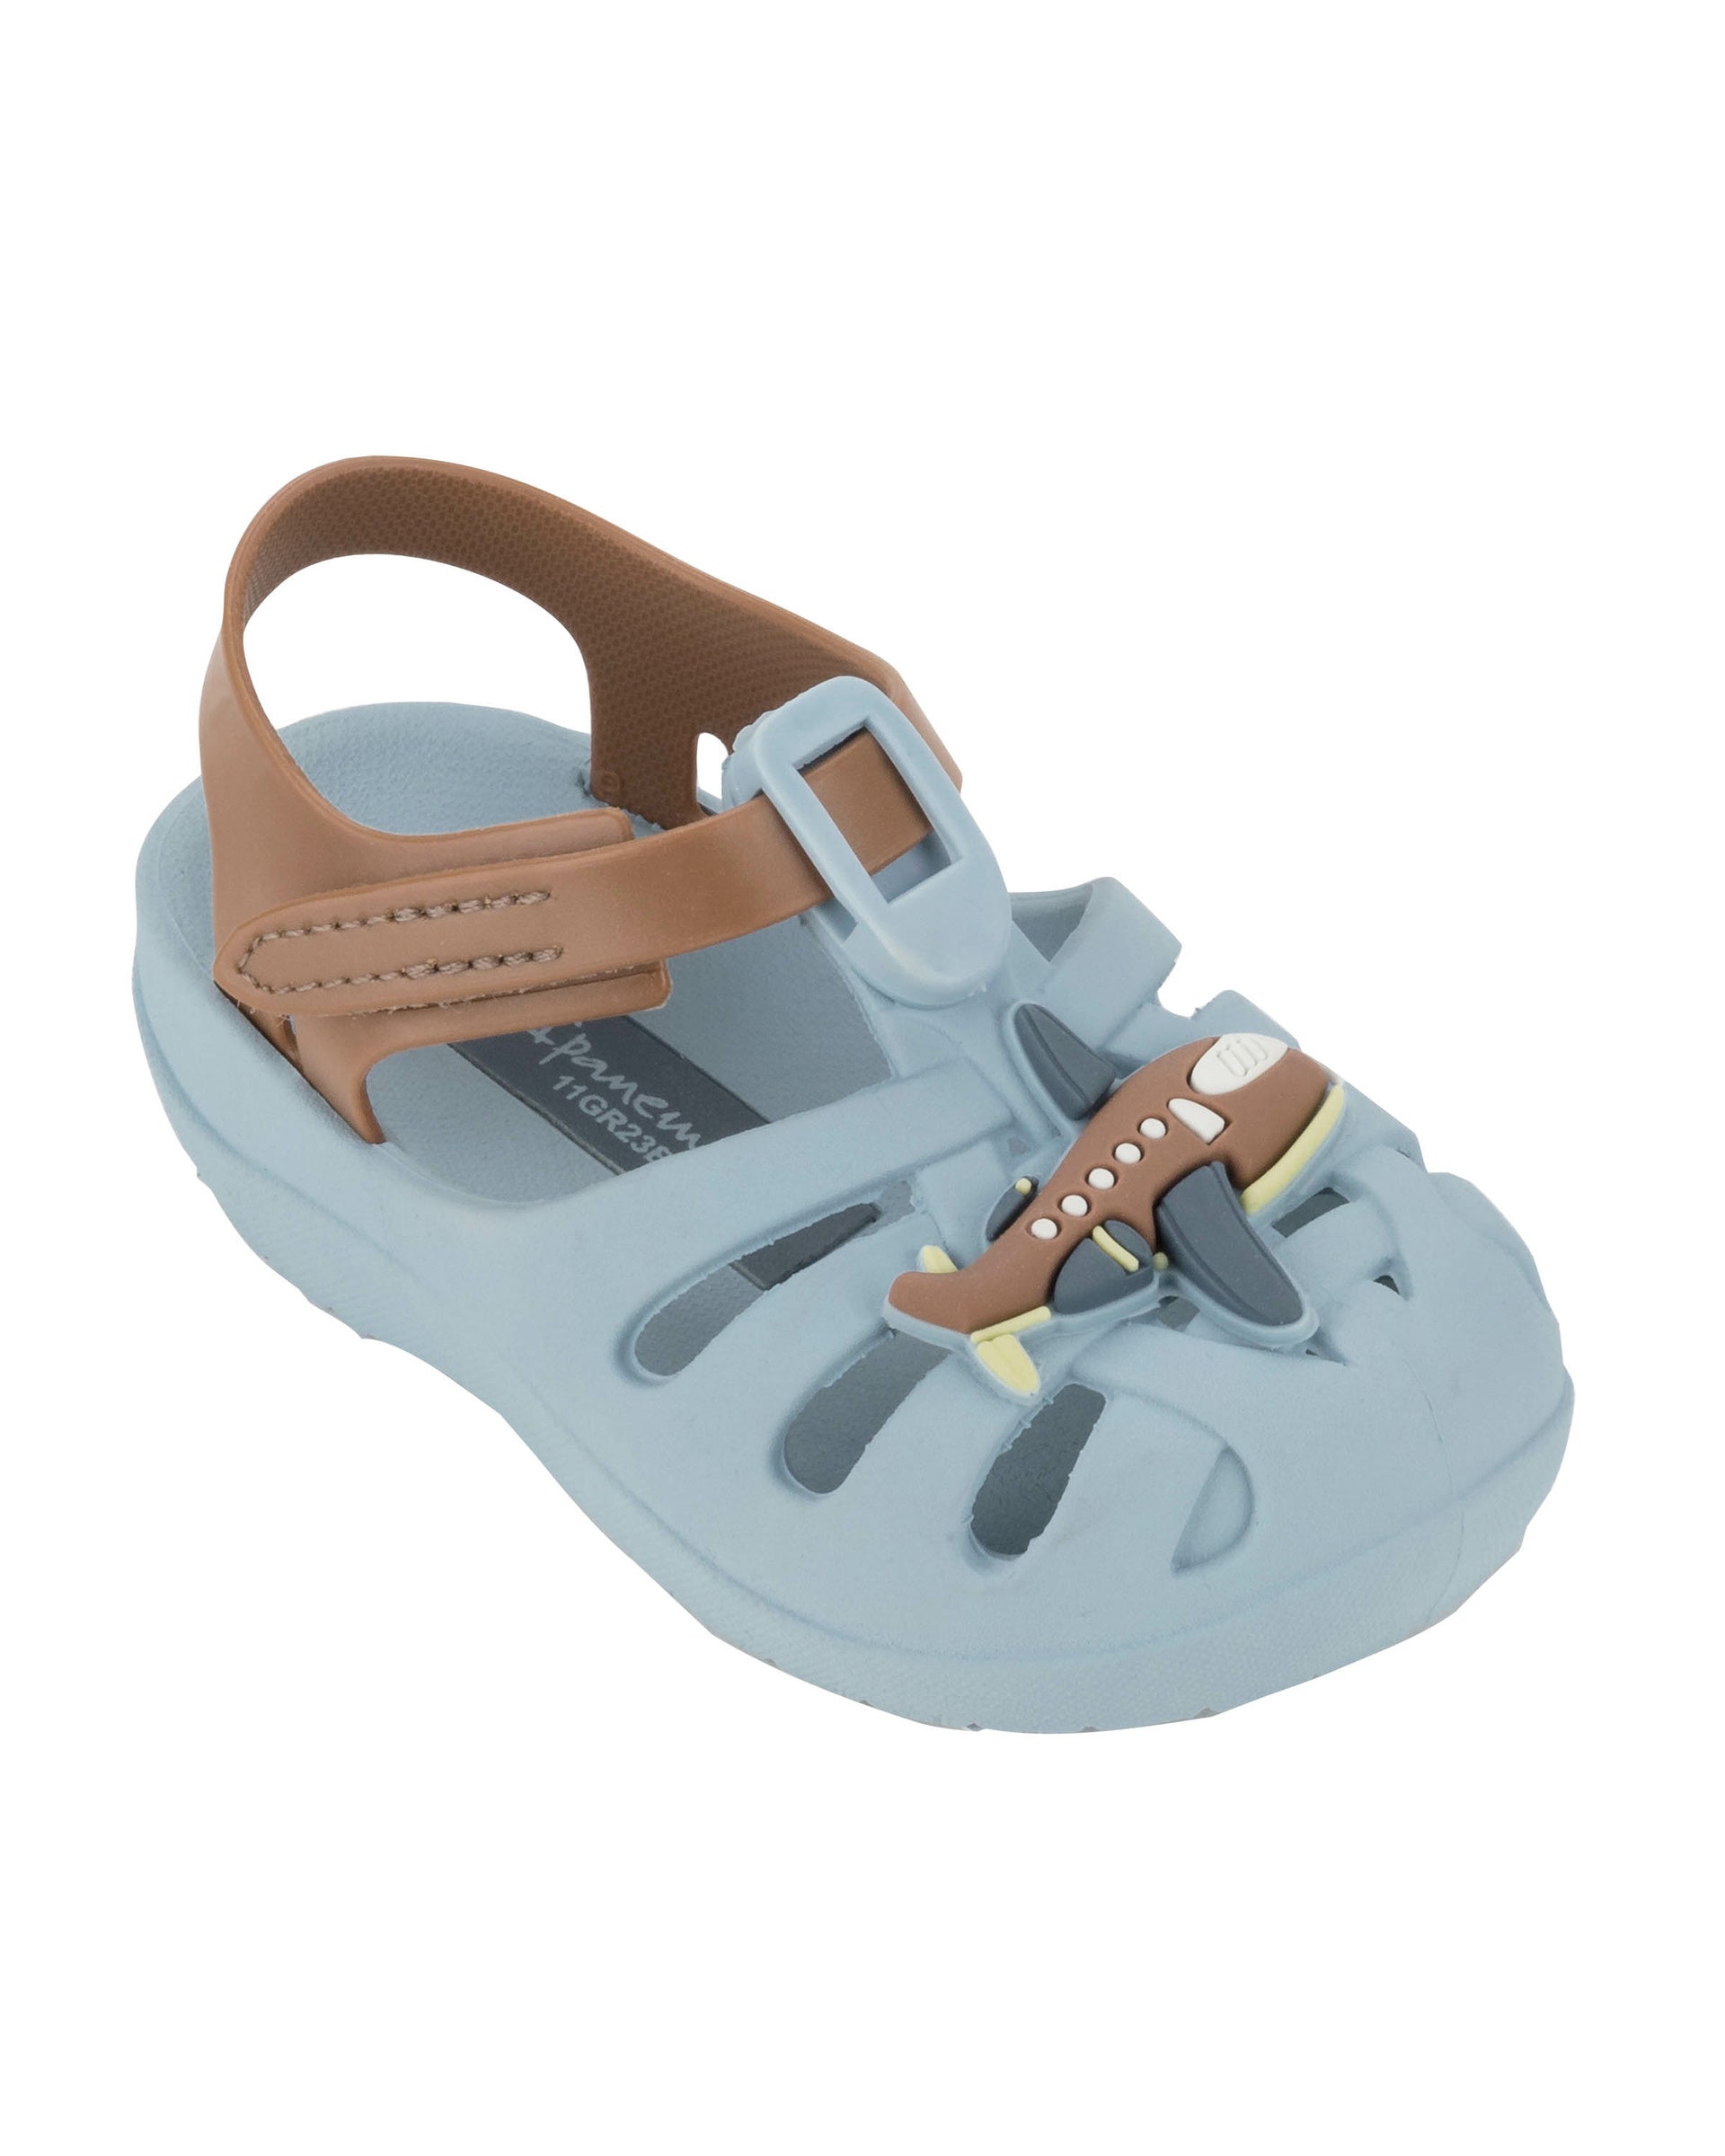 Angled view of a blue Ipanema Summer baby sandal with airplane on the upper and a brown strap.